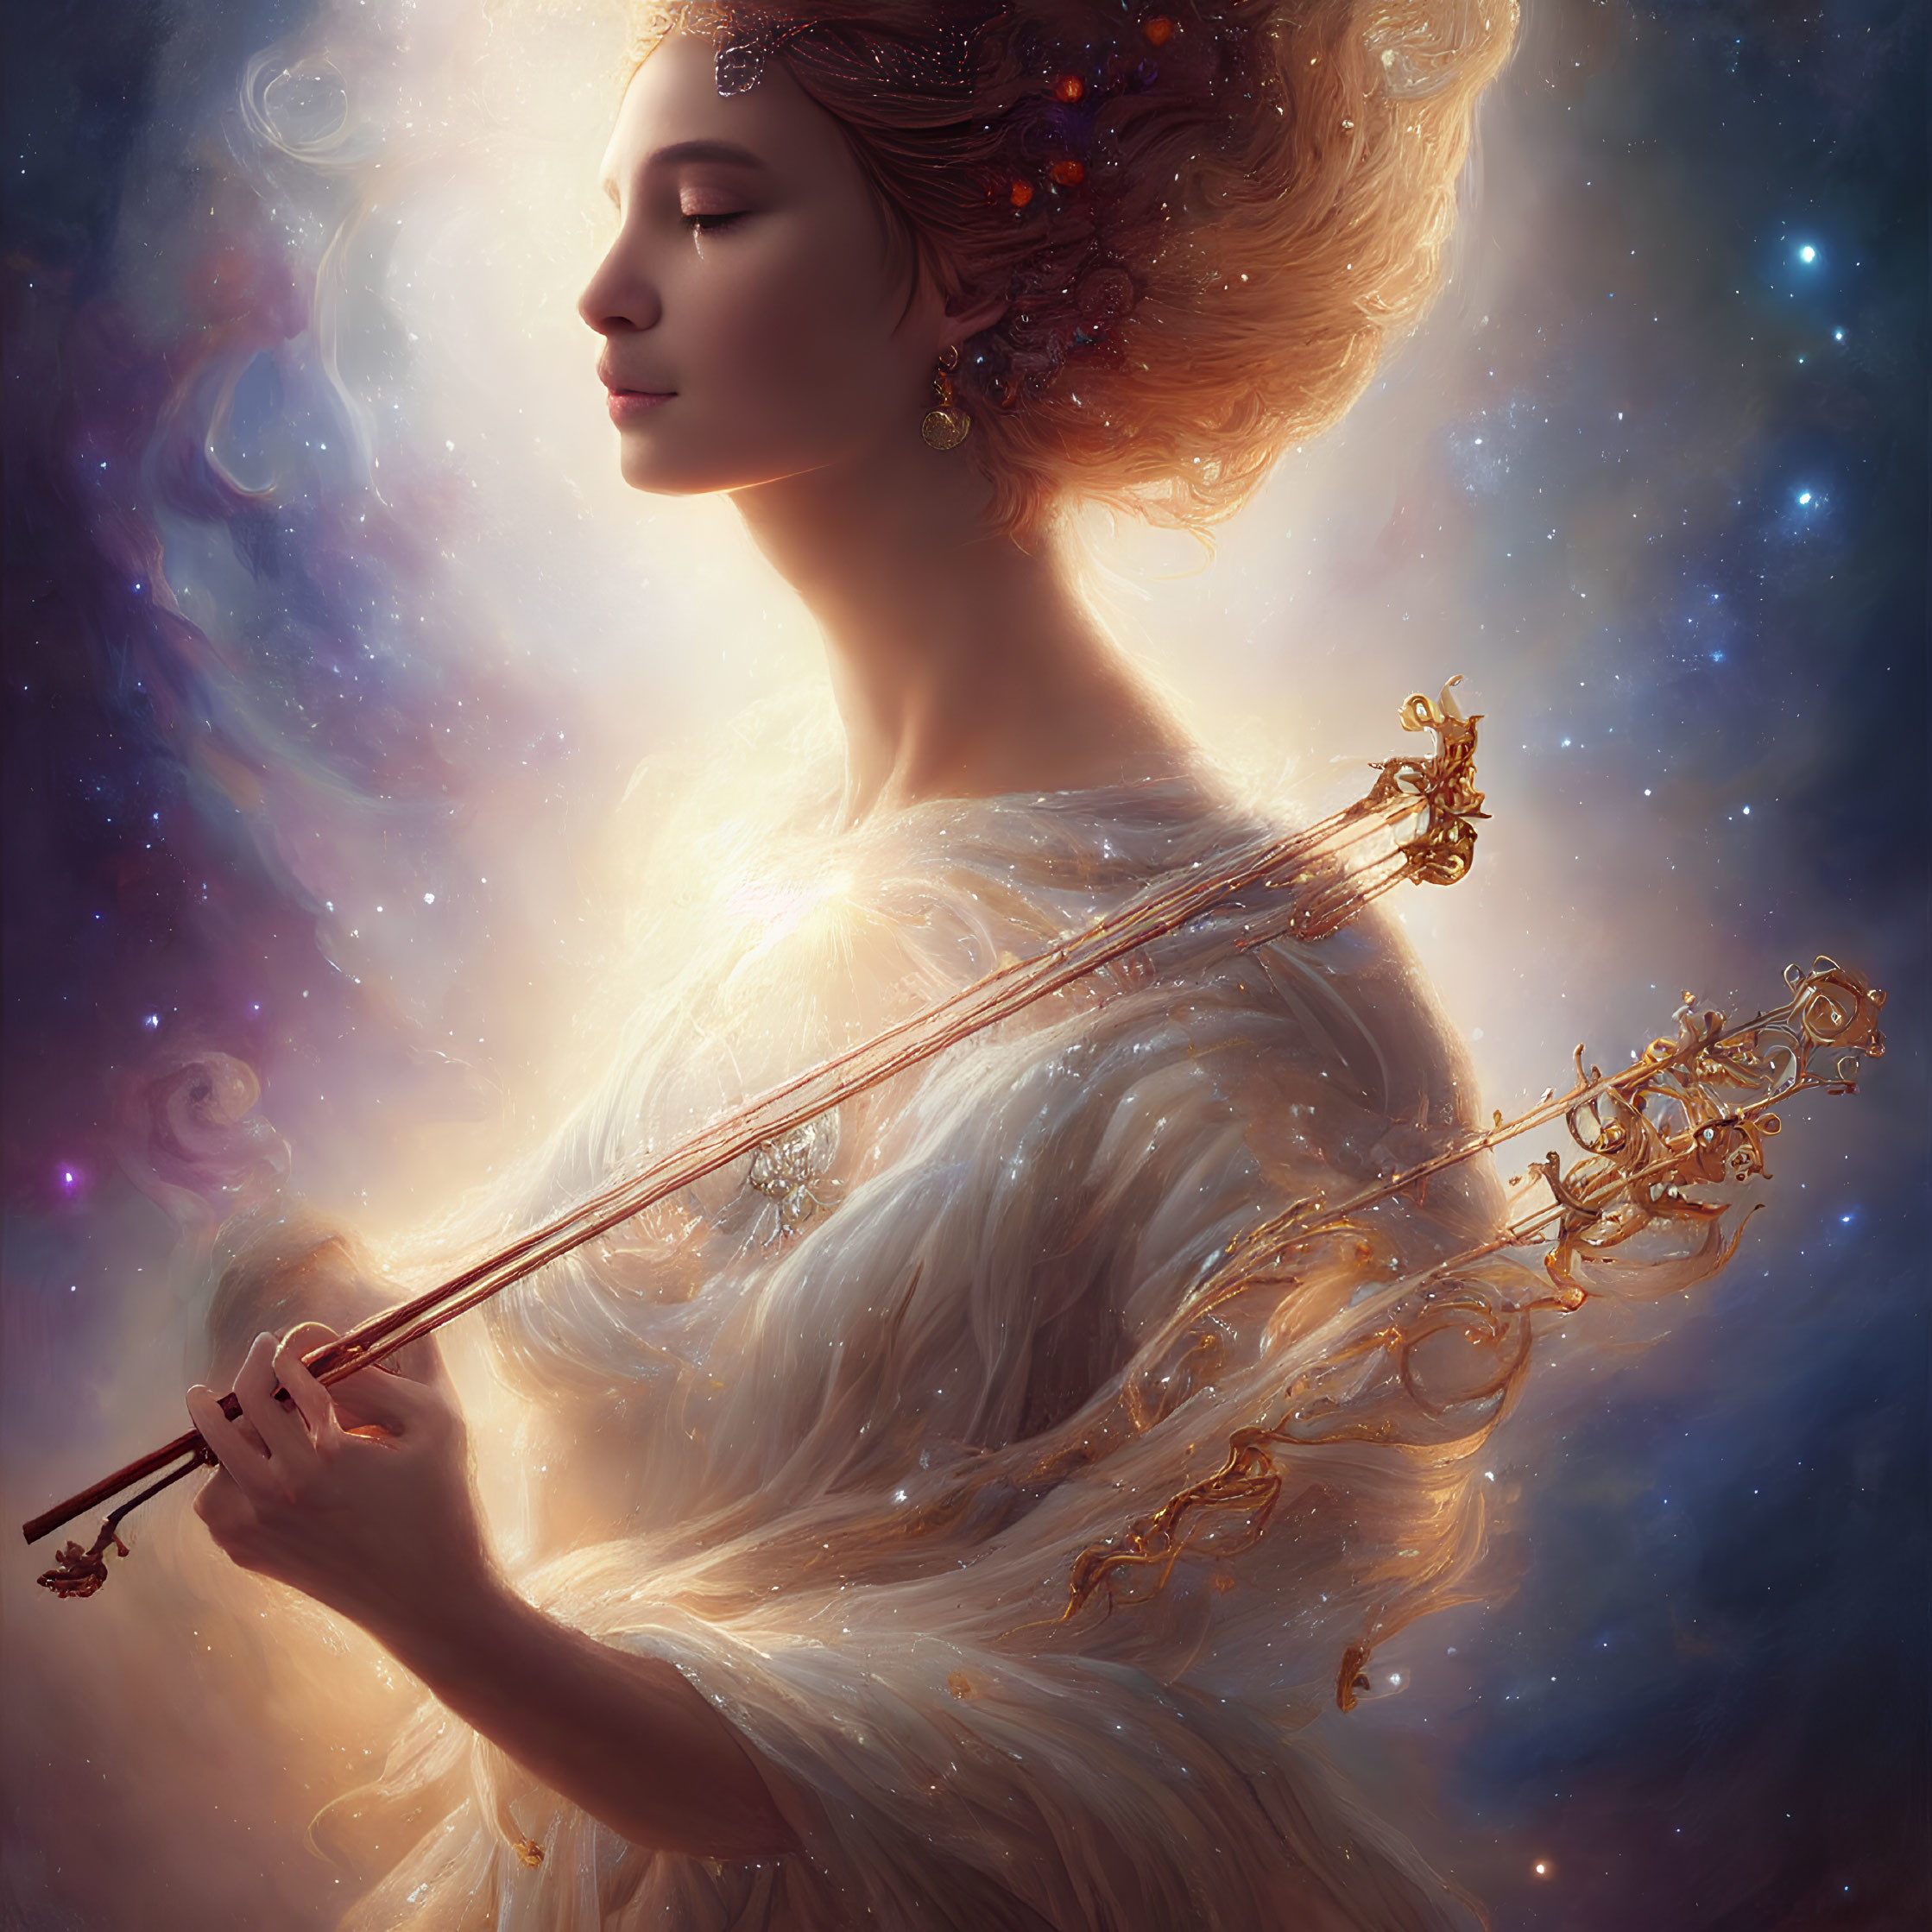 Ethereal woman with celestial hair accessories holding golden key in cosmic glow